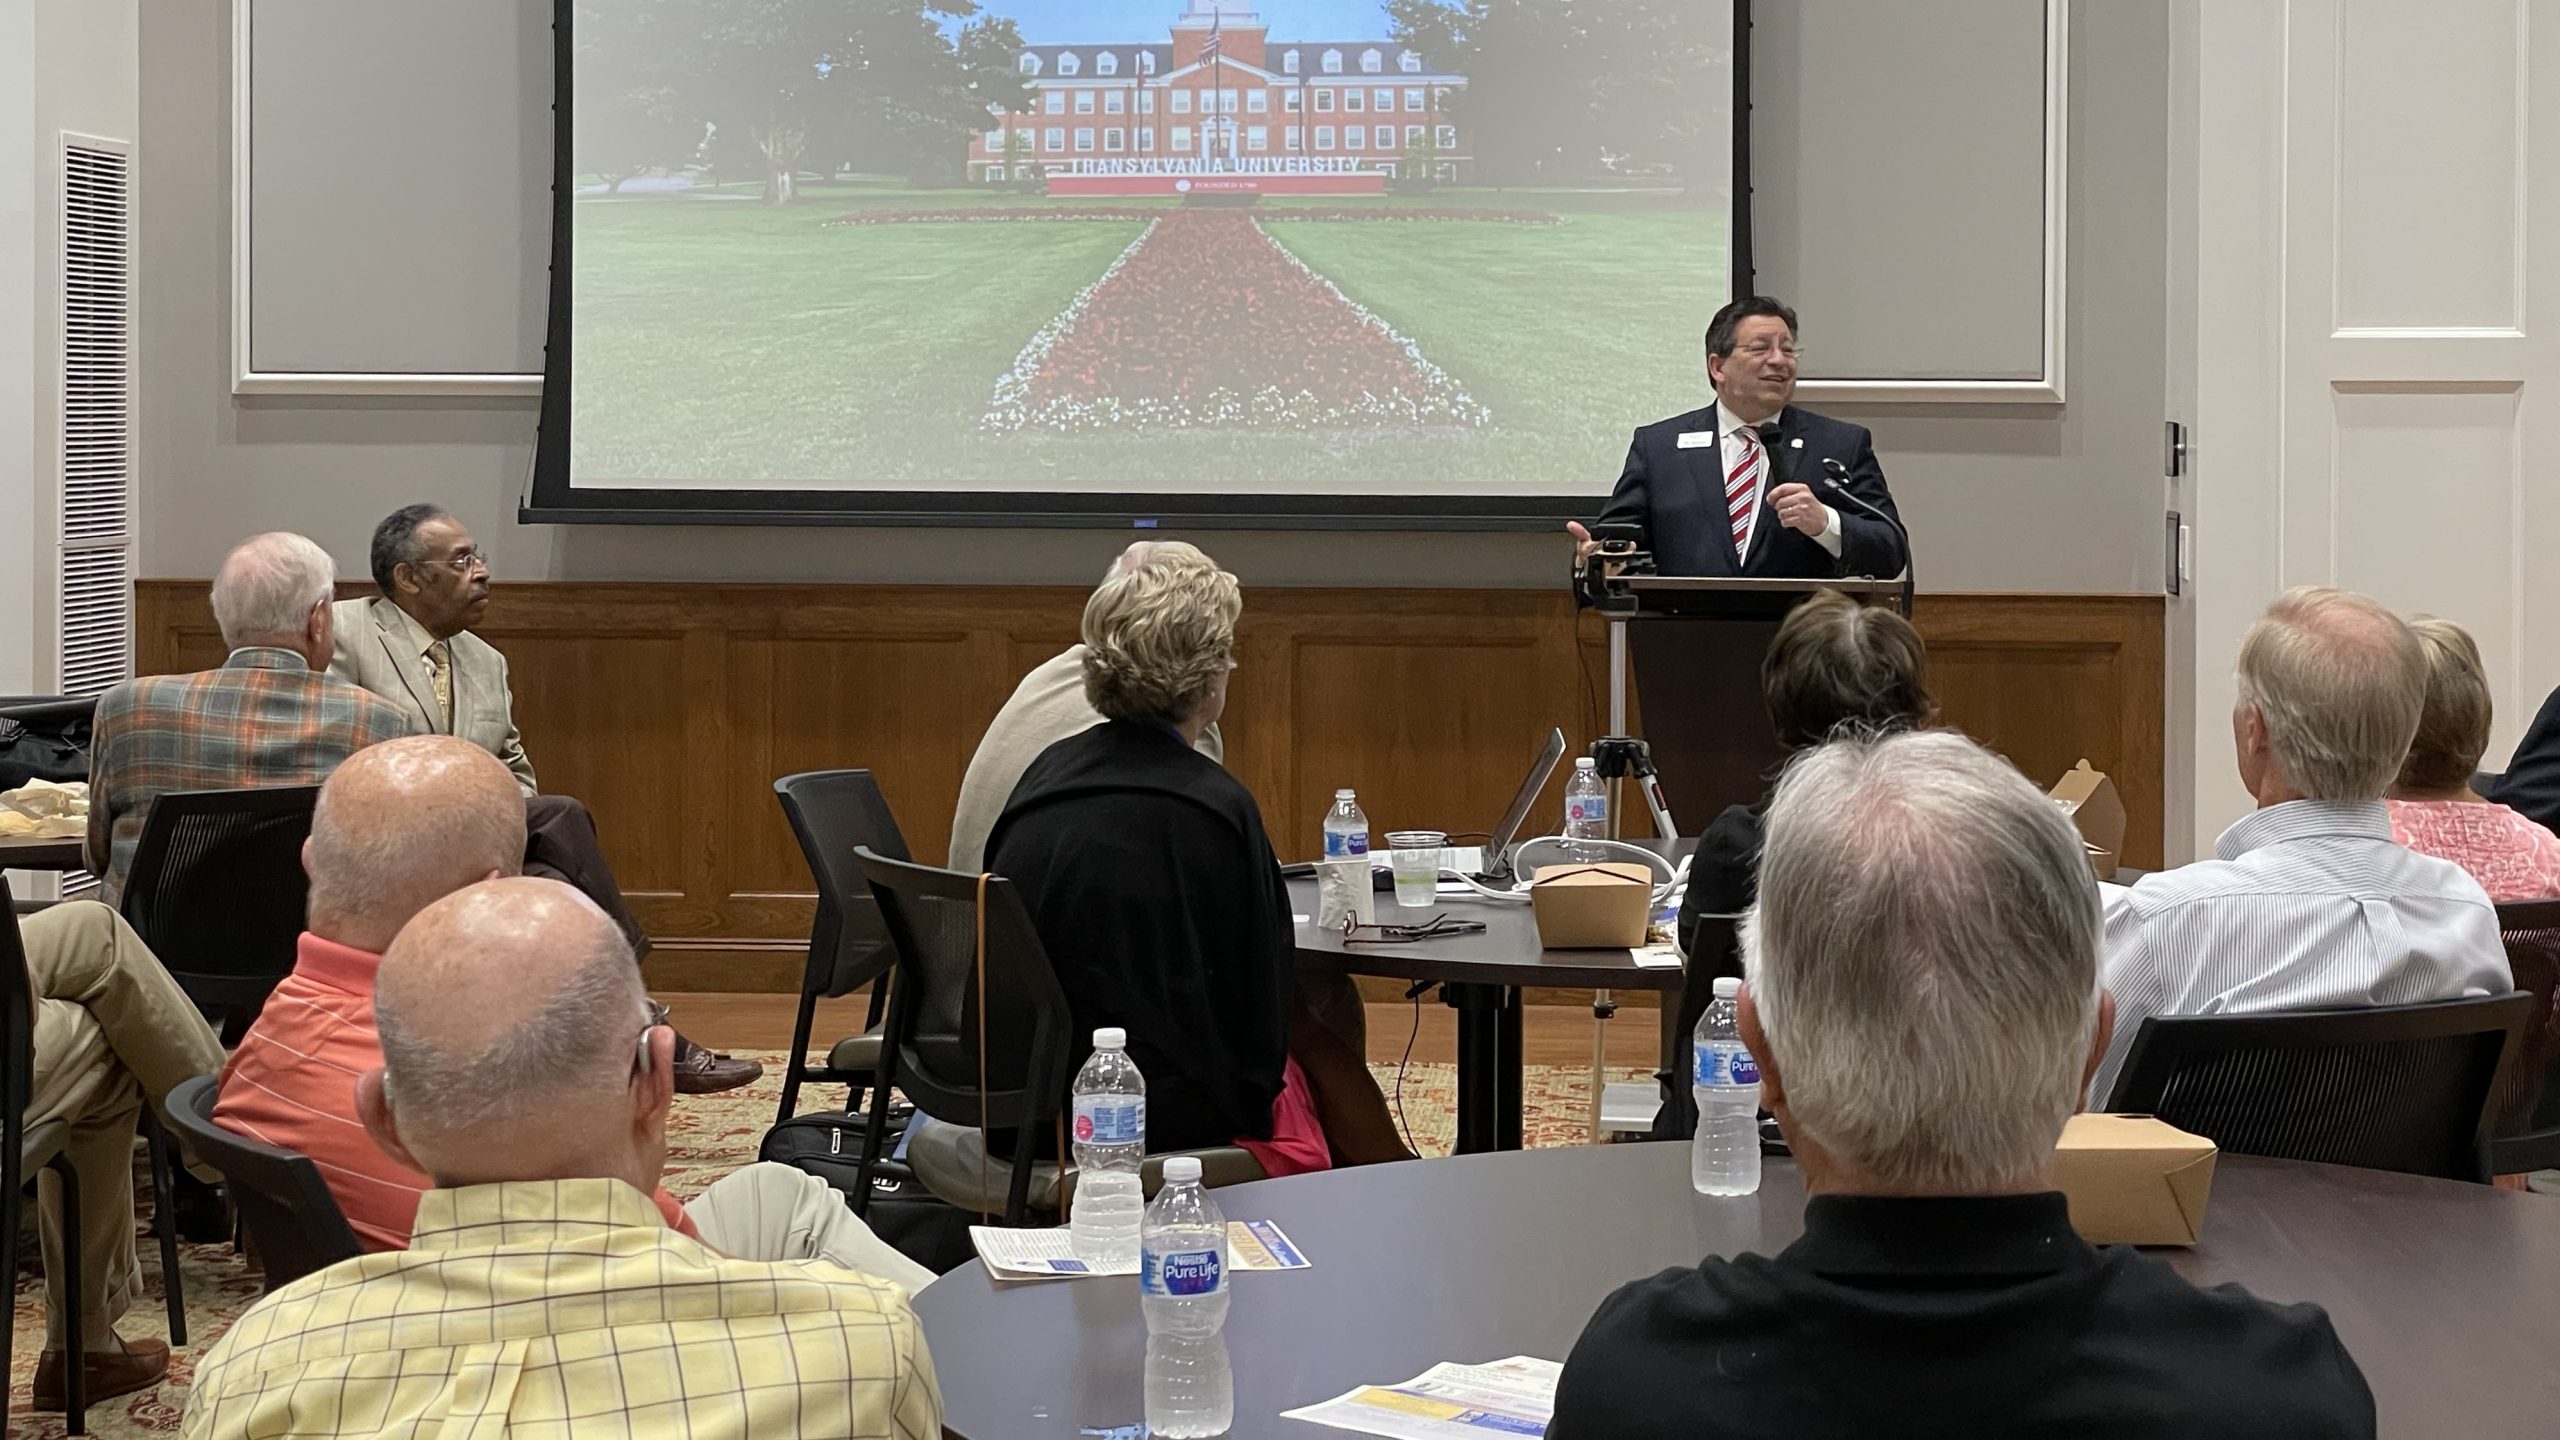 Transylvania President Brien Lewis was the featured speaker at the Rotary Club of Lexington on July 22. The lunch meeting was held in the new William T. Young Campus Center in downtown Lexington.